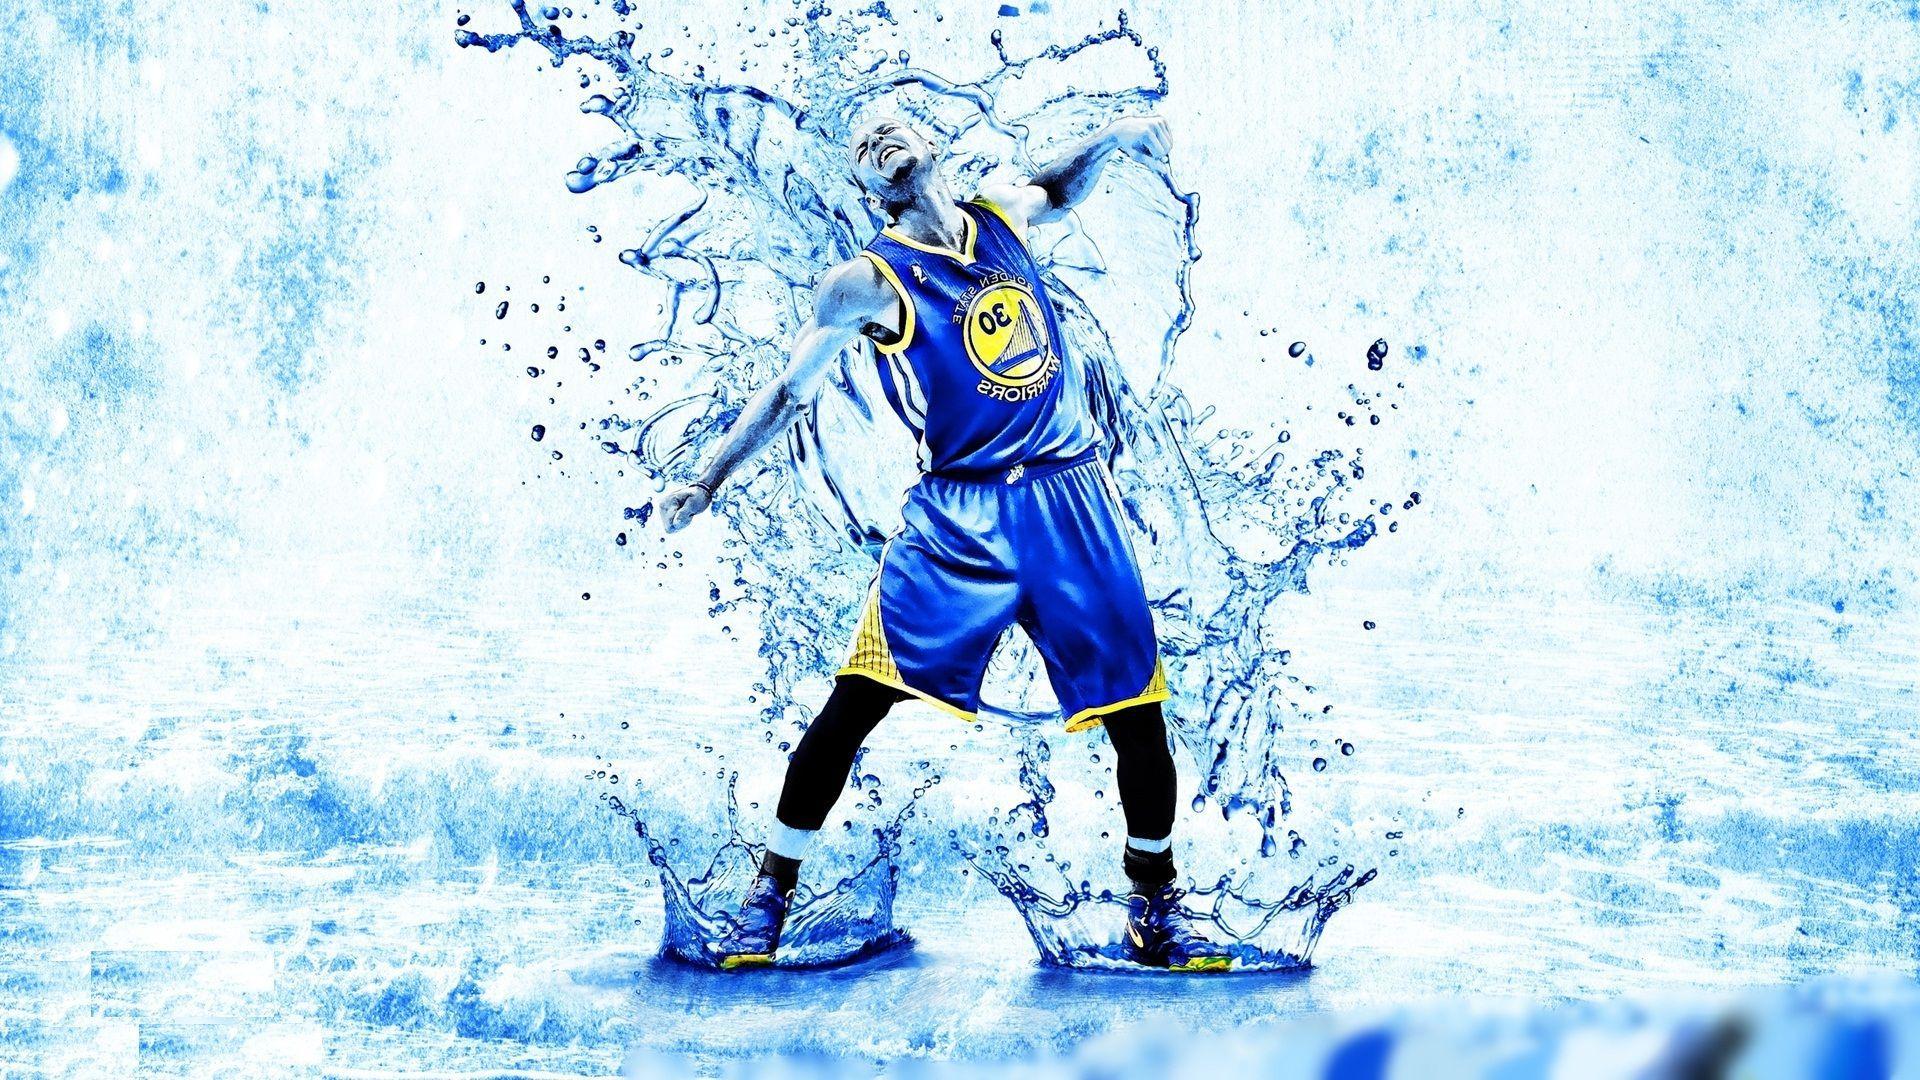 Stephen Curry Ps3 Background. Stephen curry wallpaper hd, Stephen